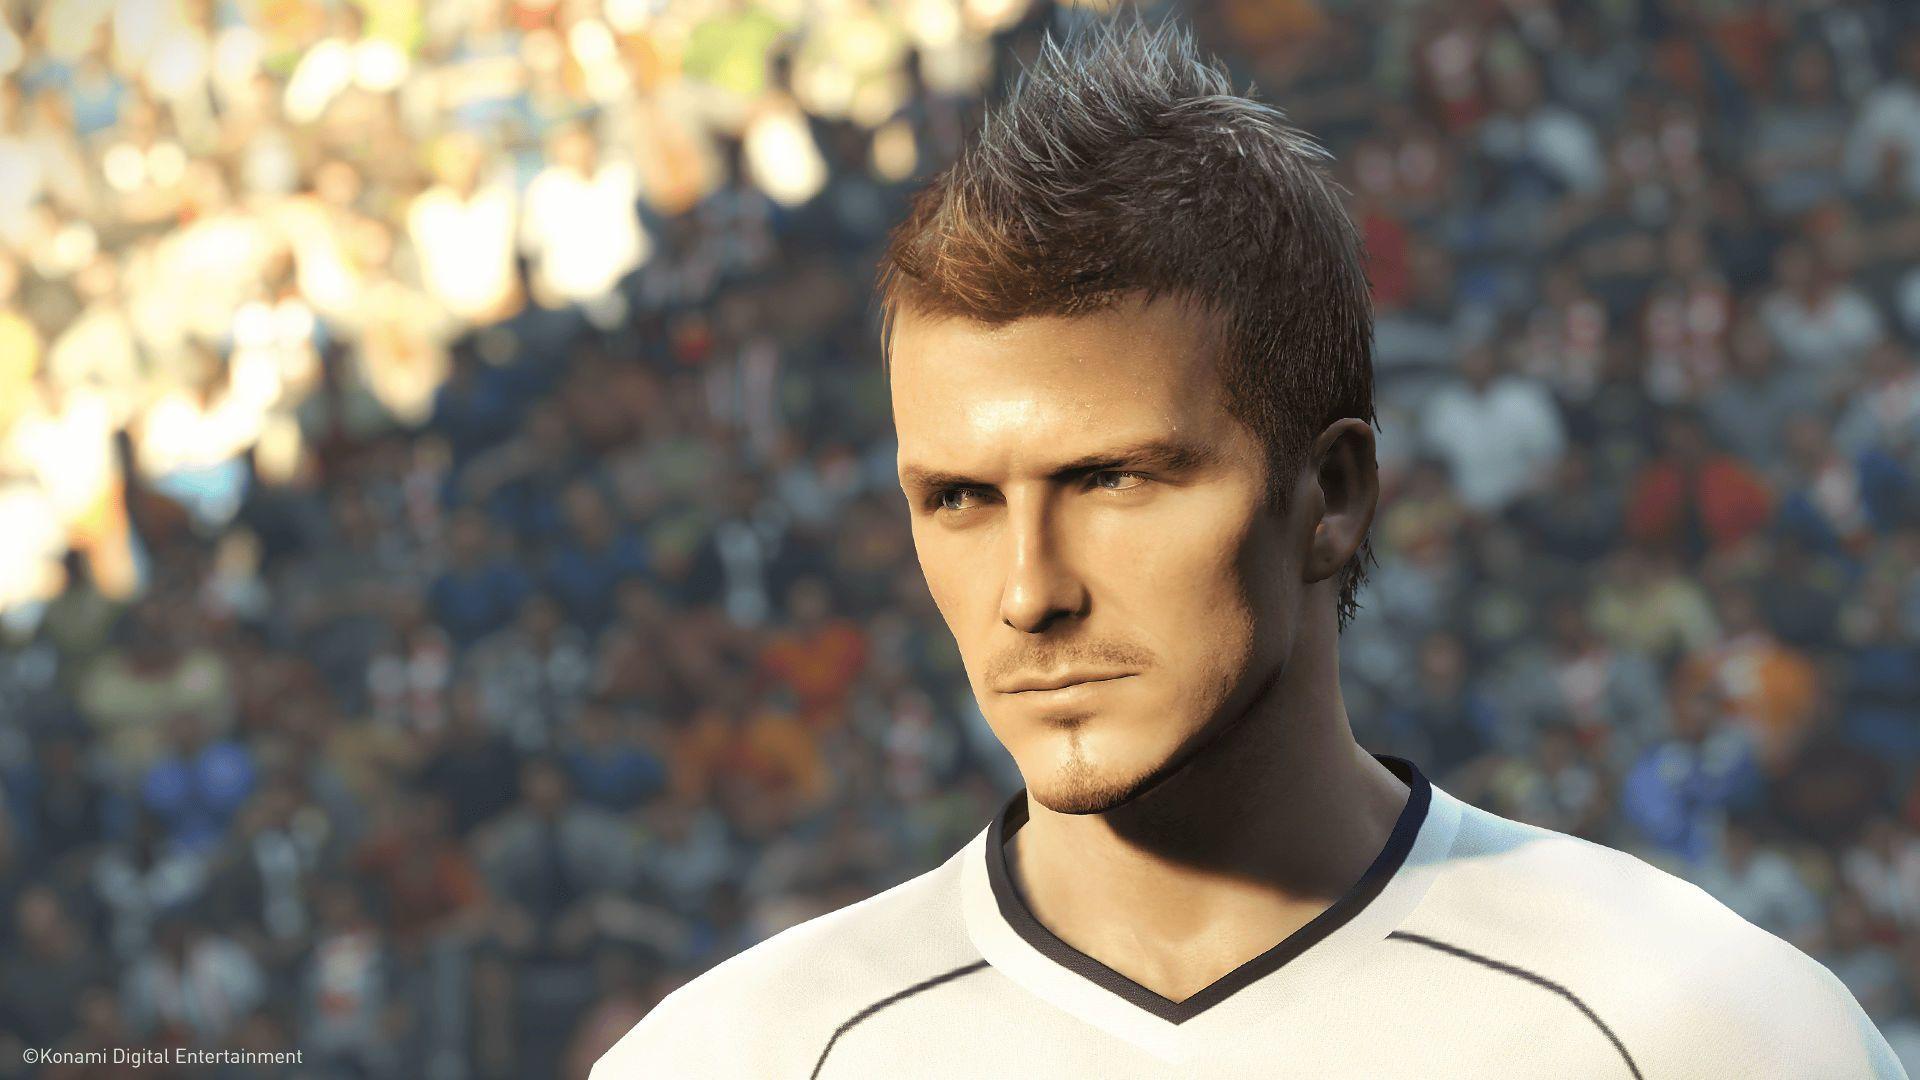 Pro Evolution Soccer 2019 screenshots, image and picture